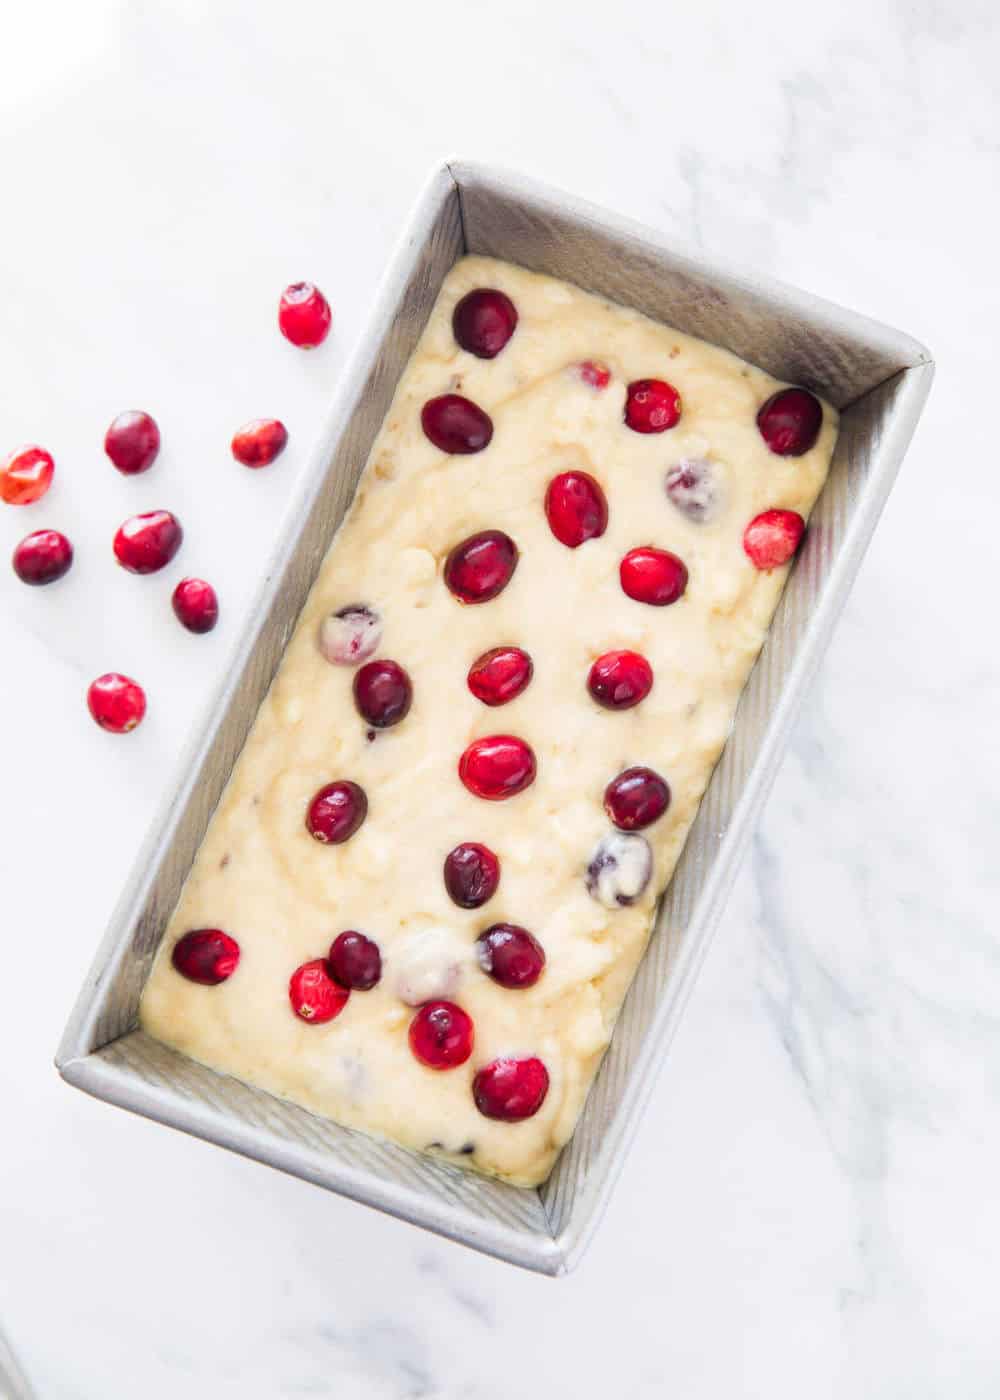 Cranberry banana bread in loaf pan ready to bake.